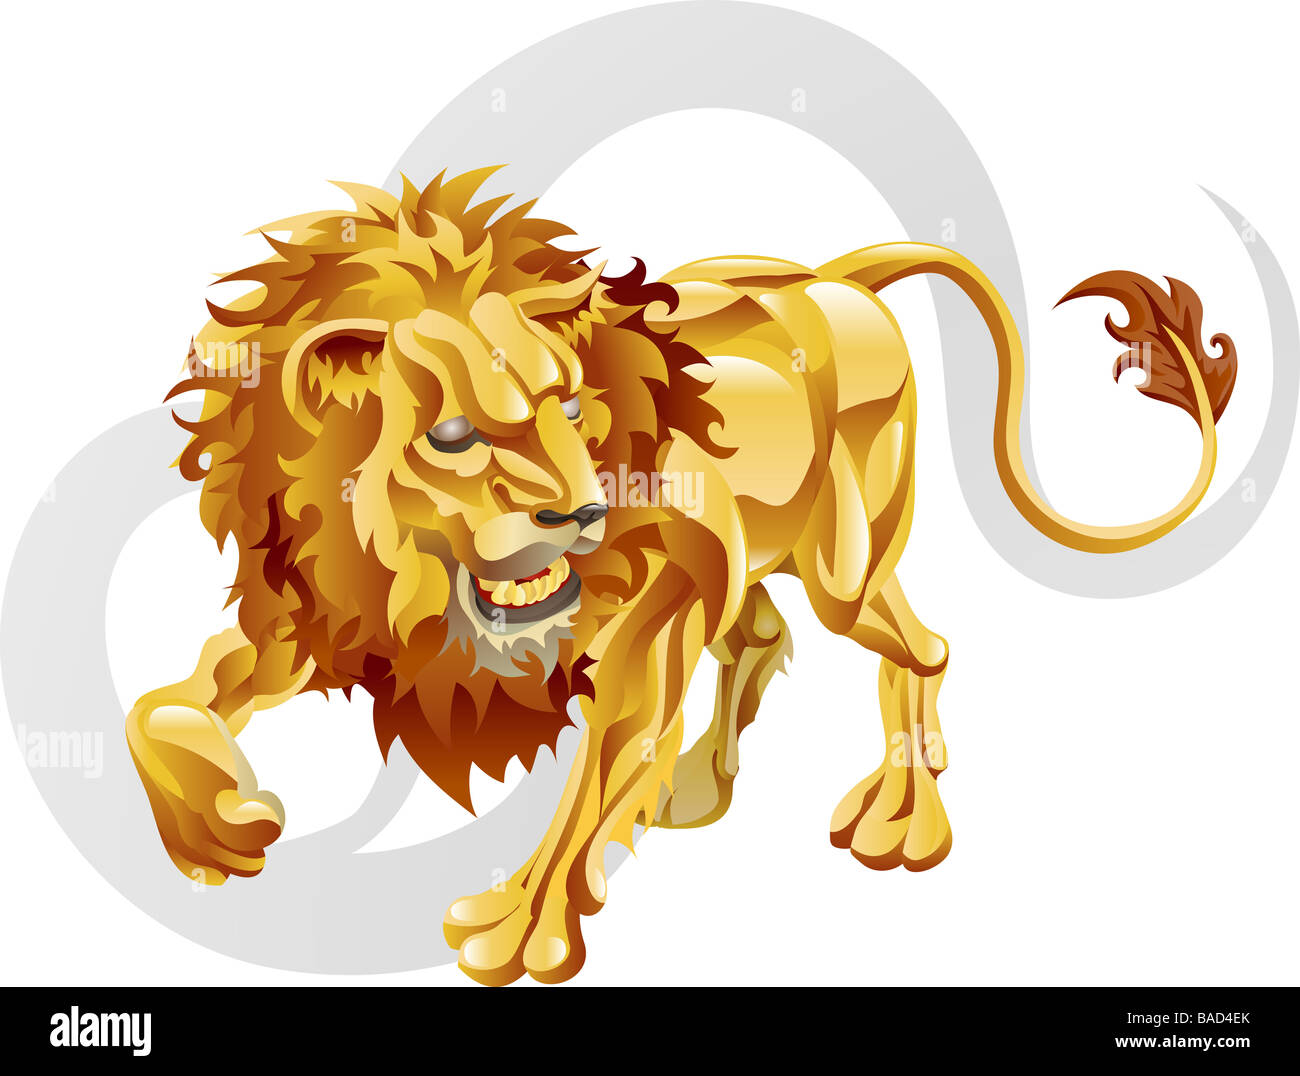 Illustration representing Leo the lion star or birth sign Includes the symbol or icon in the background Stock Photo